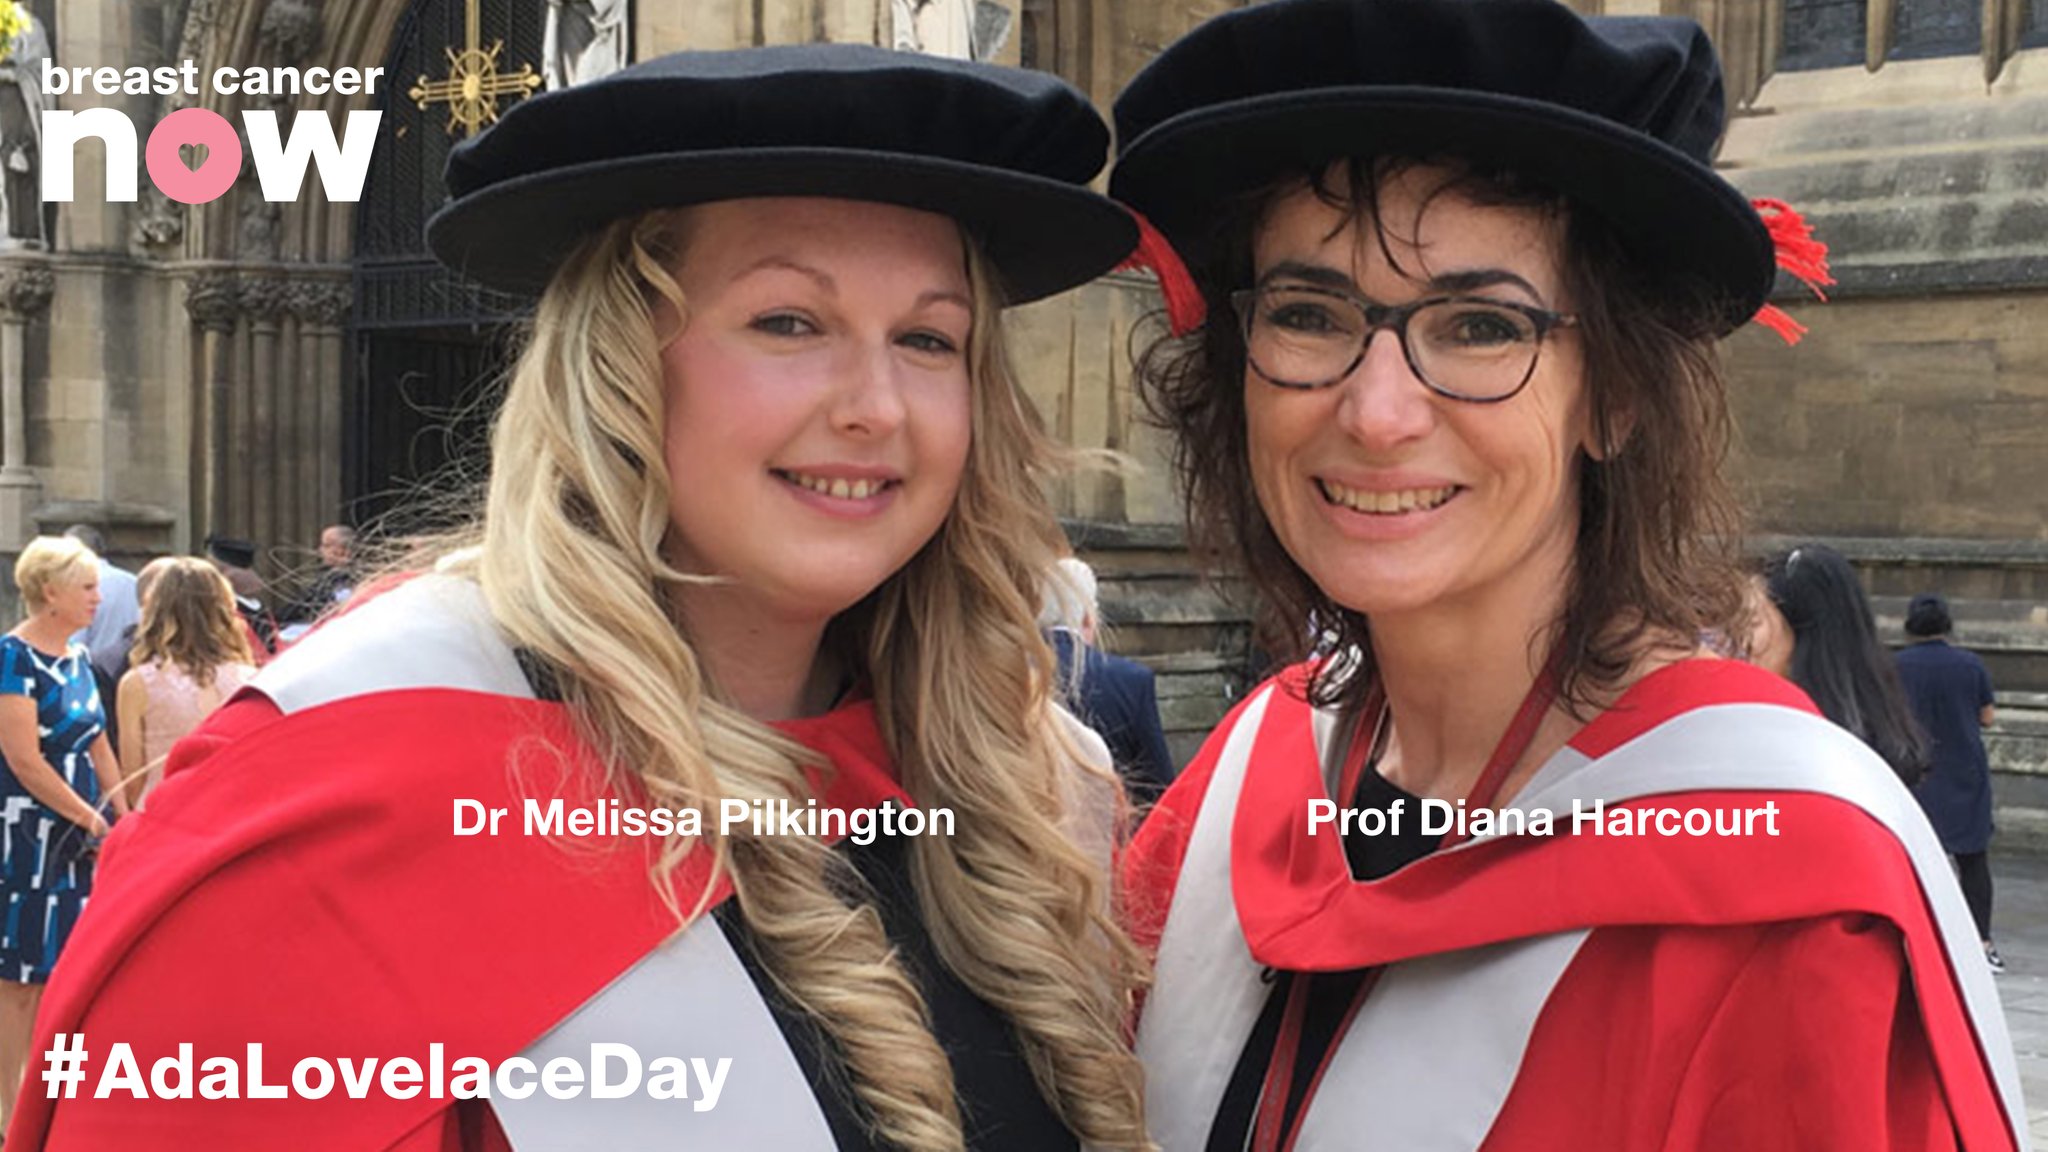 Dr. Melissa Pilkington’s research will support women coping with hair loss from chemotherapy. #AdaLovelaceDay ▸ https://t.co/flEXvnmKIe https://t.co/LUDlzlkjib